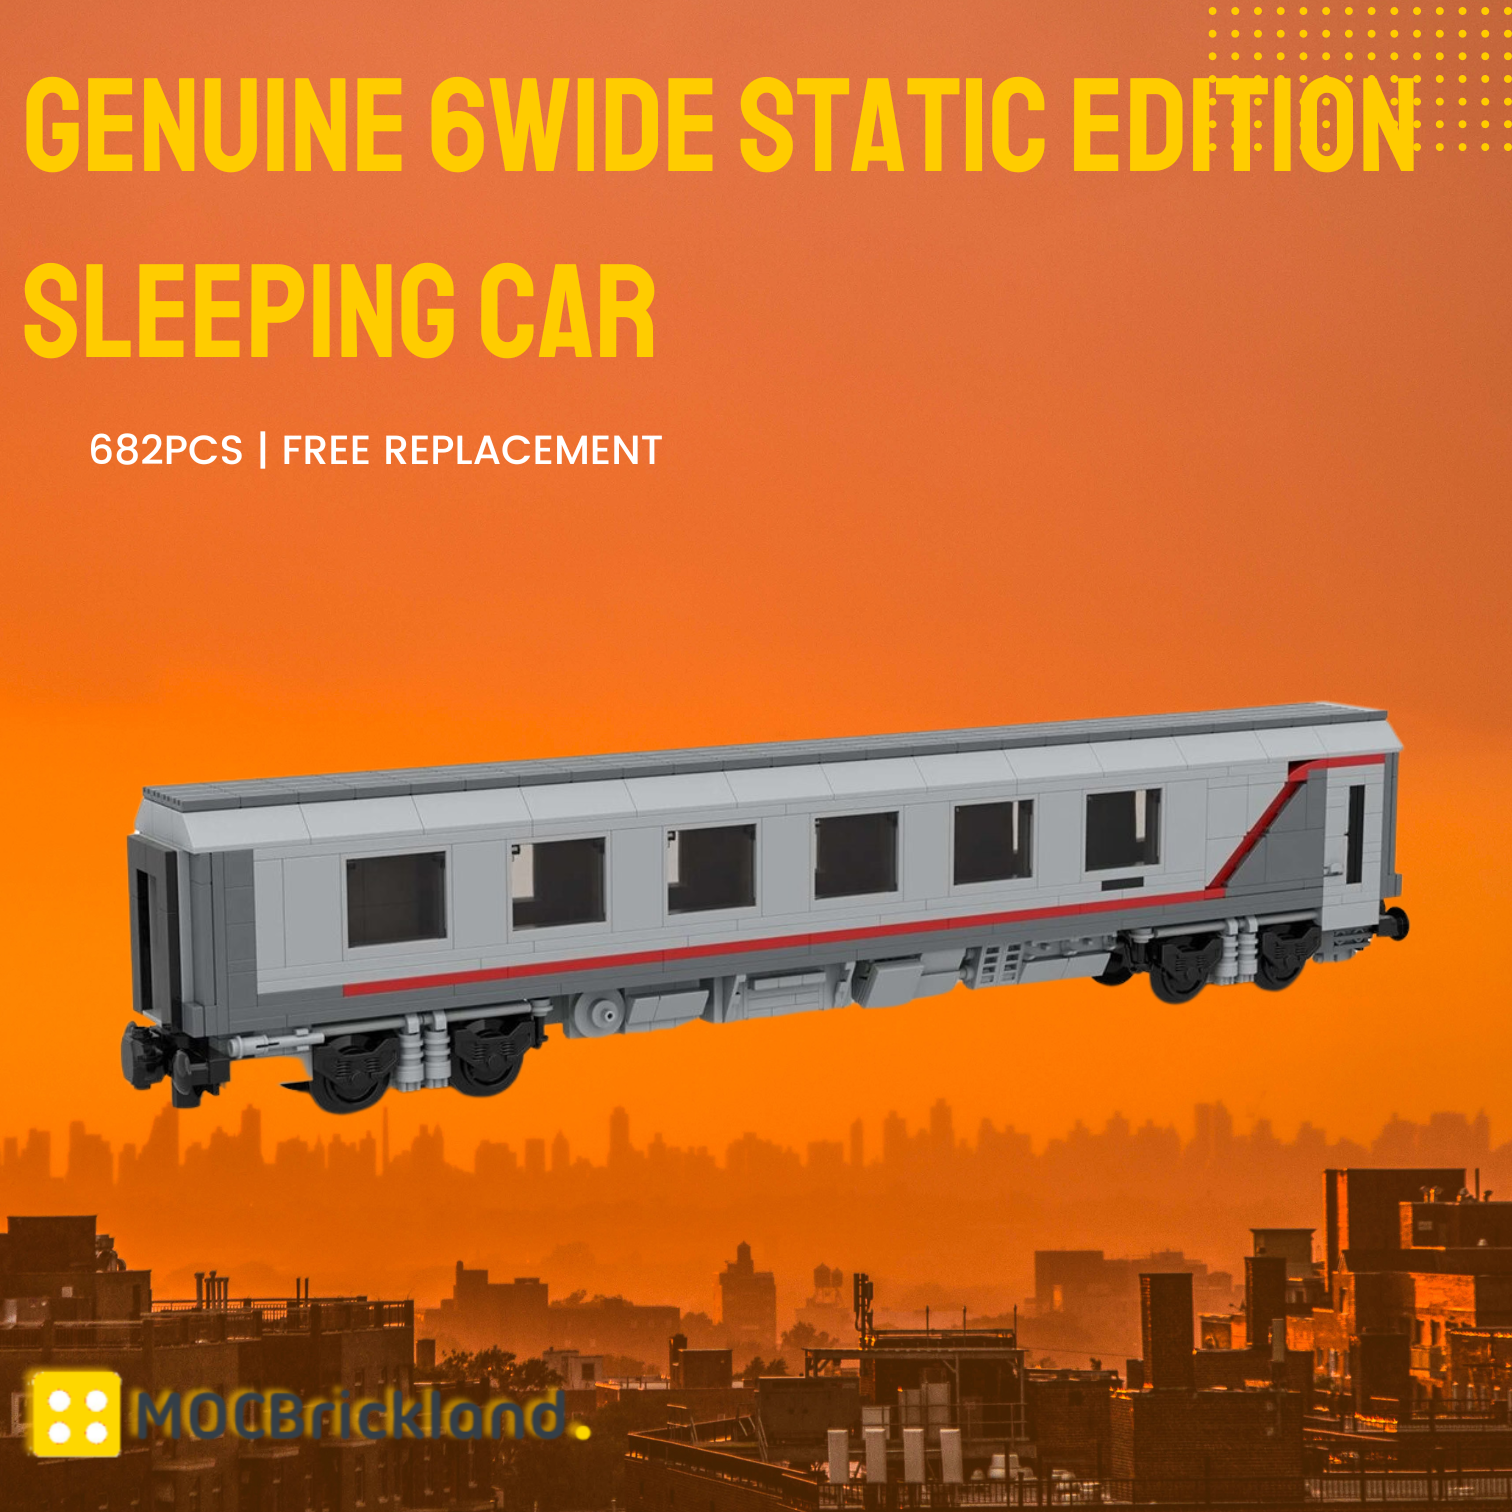 Genuine 6wide Static Edition Sleeping Car MOC-67867 Technic With 682pcs